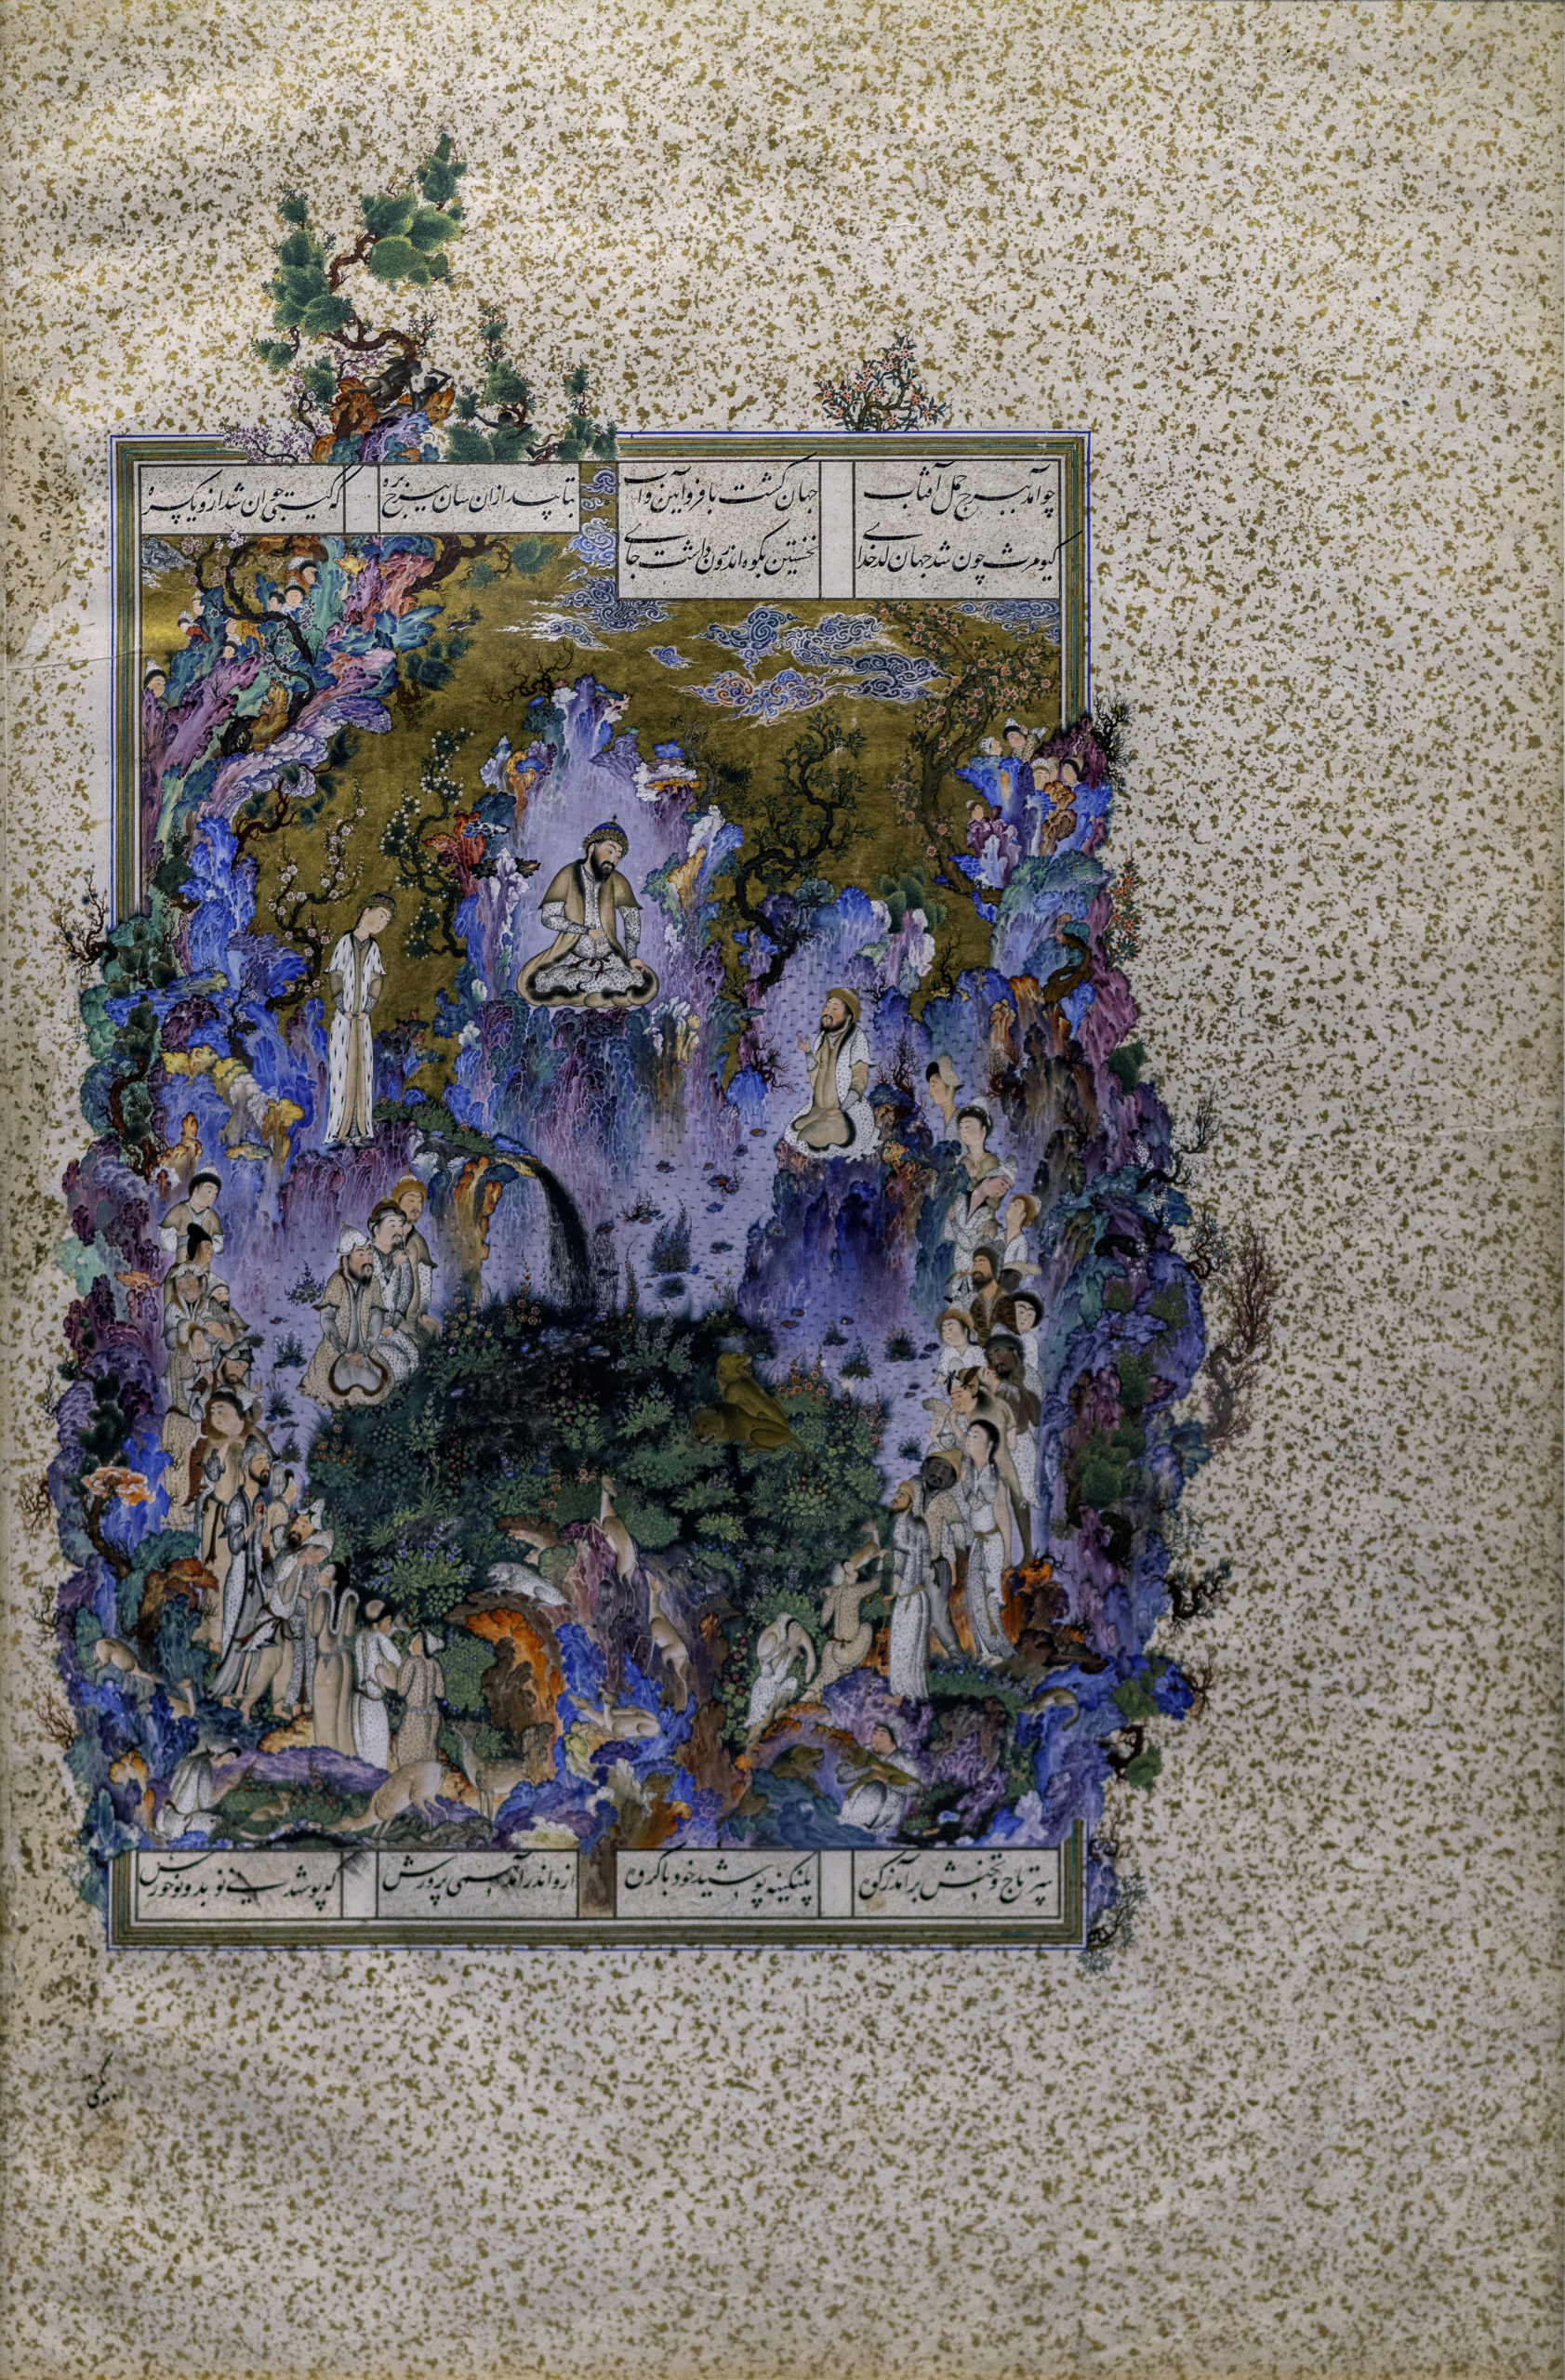 Sultan Muhammad, "The Lord of the World" shown as part of "The Court of Gayumars," 47 x 32 cm, opaque watercolor, ink, gold, silver on paper, folio 20v, Shahnameh of Shah Tahmasp I (Safavid), Tabriz, Iran (Aga Khan Museum, Toronto)